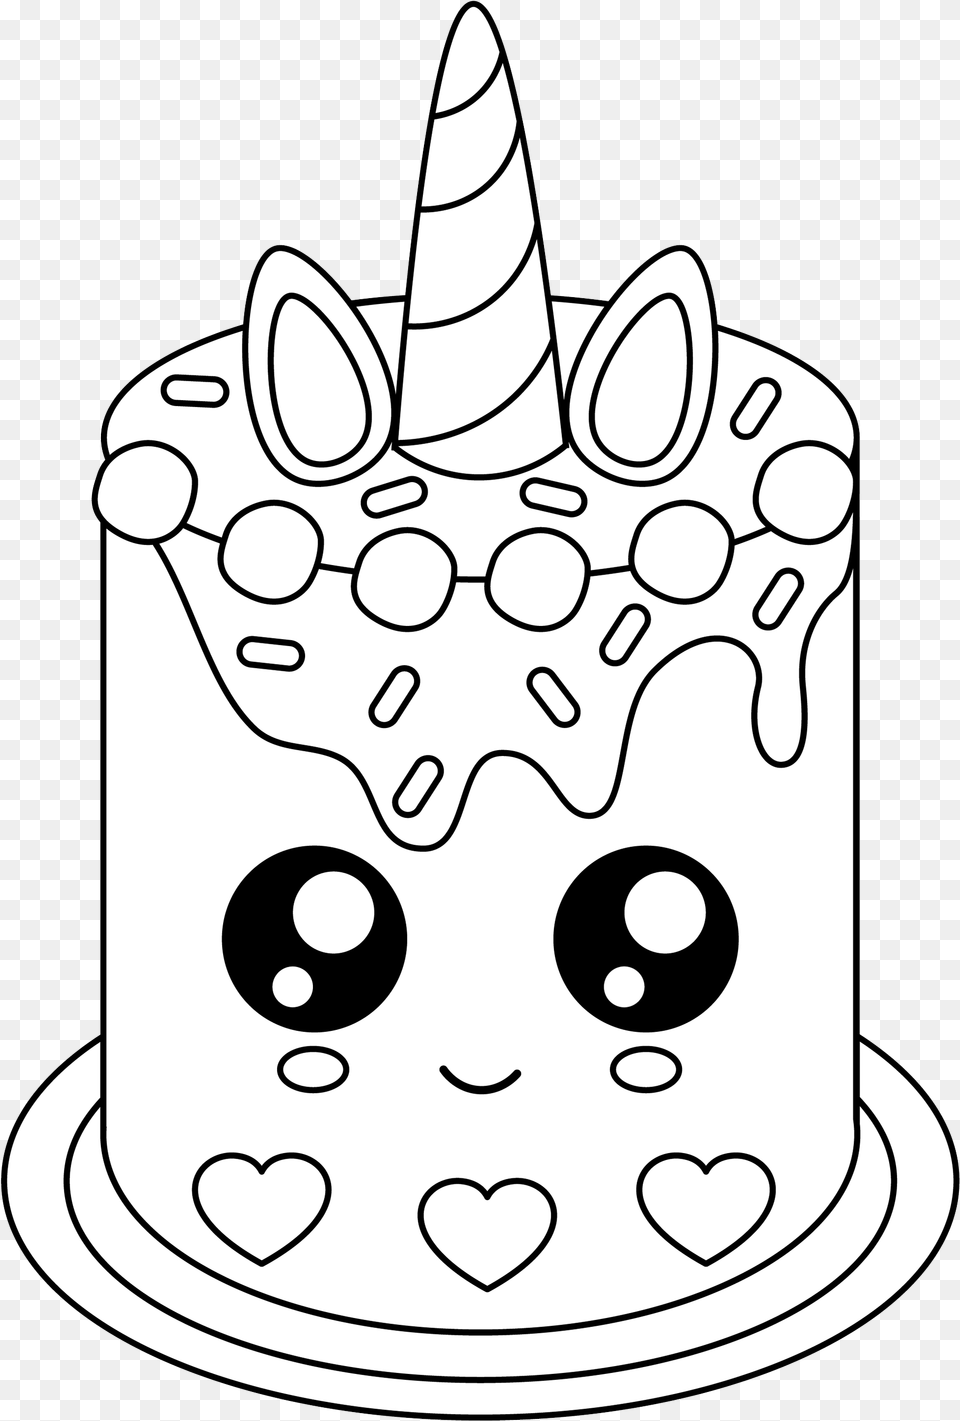 Unicorn Cake Coloring Pages Cartoons Cute Cake Coloring Pages, Birthday Cake, Food, Cream, Dessert Free Transparent Png